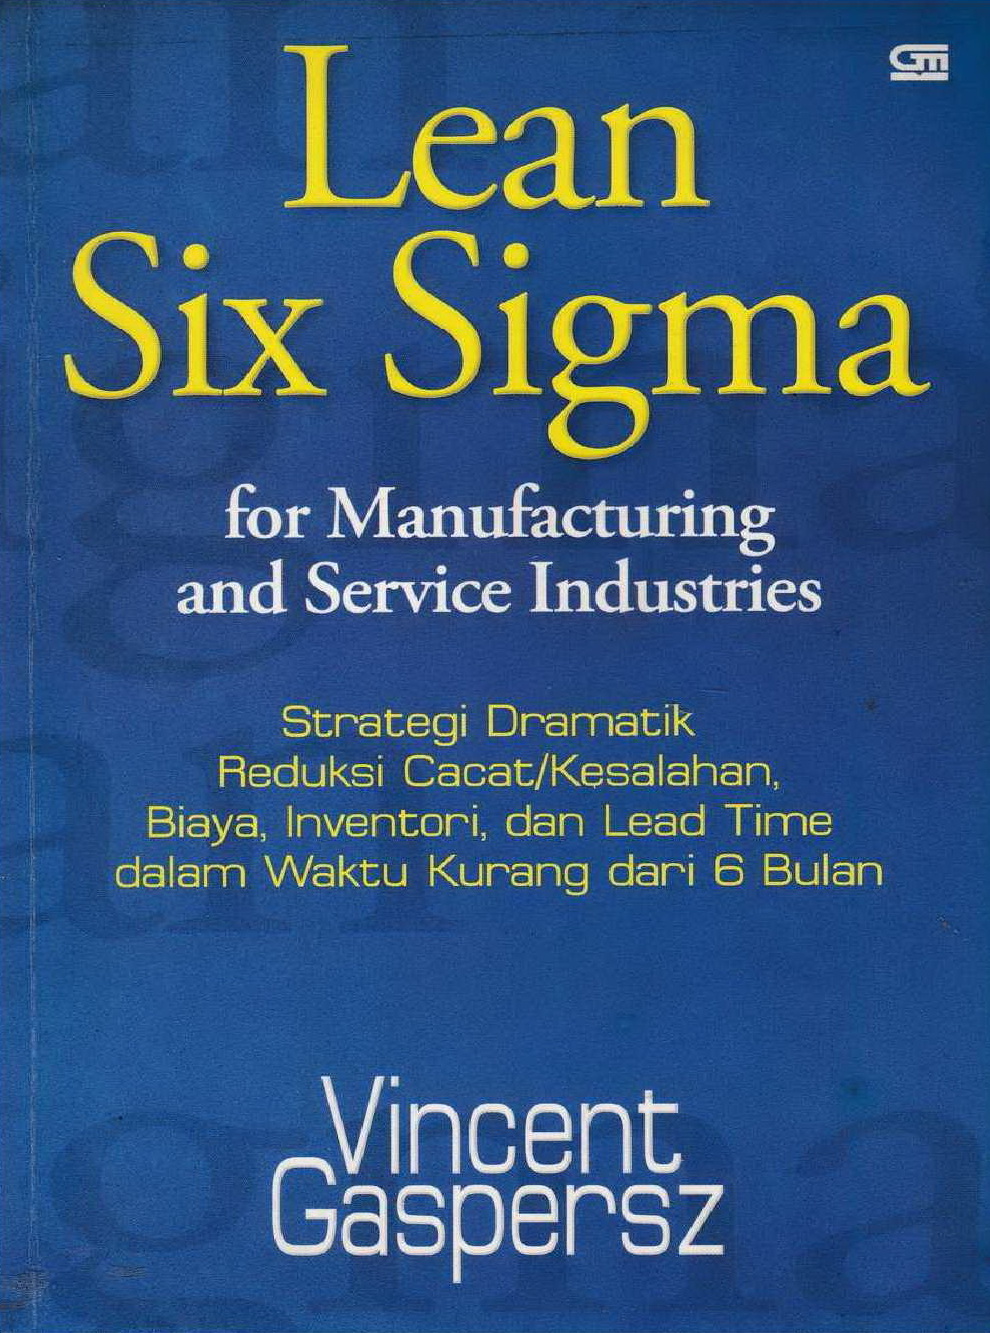 2007 Lean Six Sigma for Manufacturing and Service Industries VG